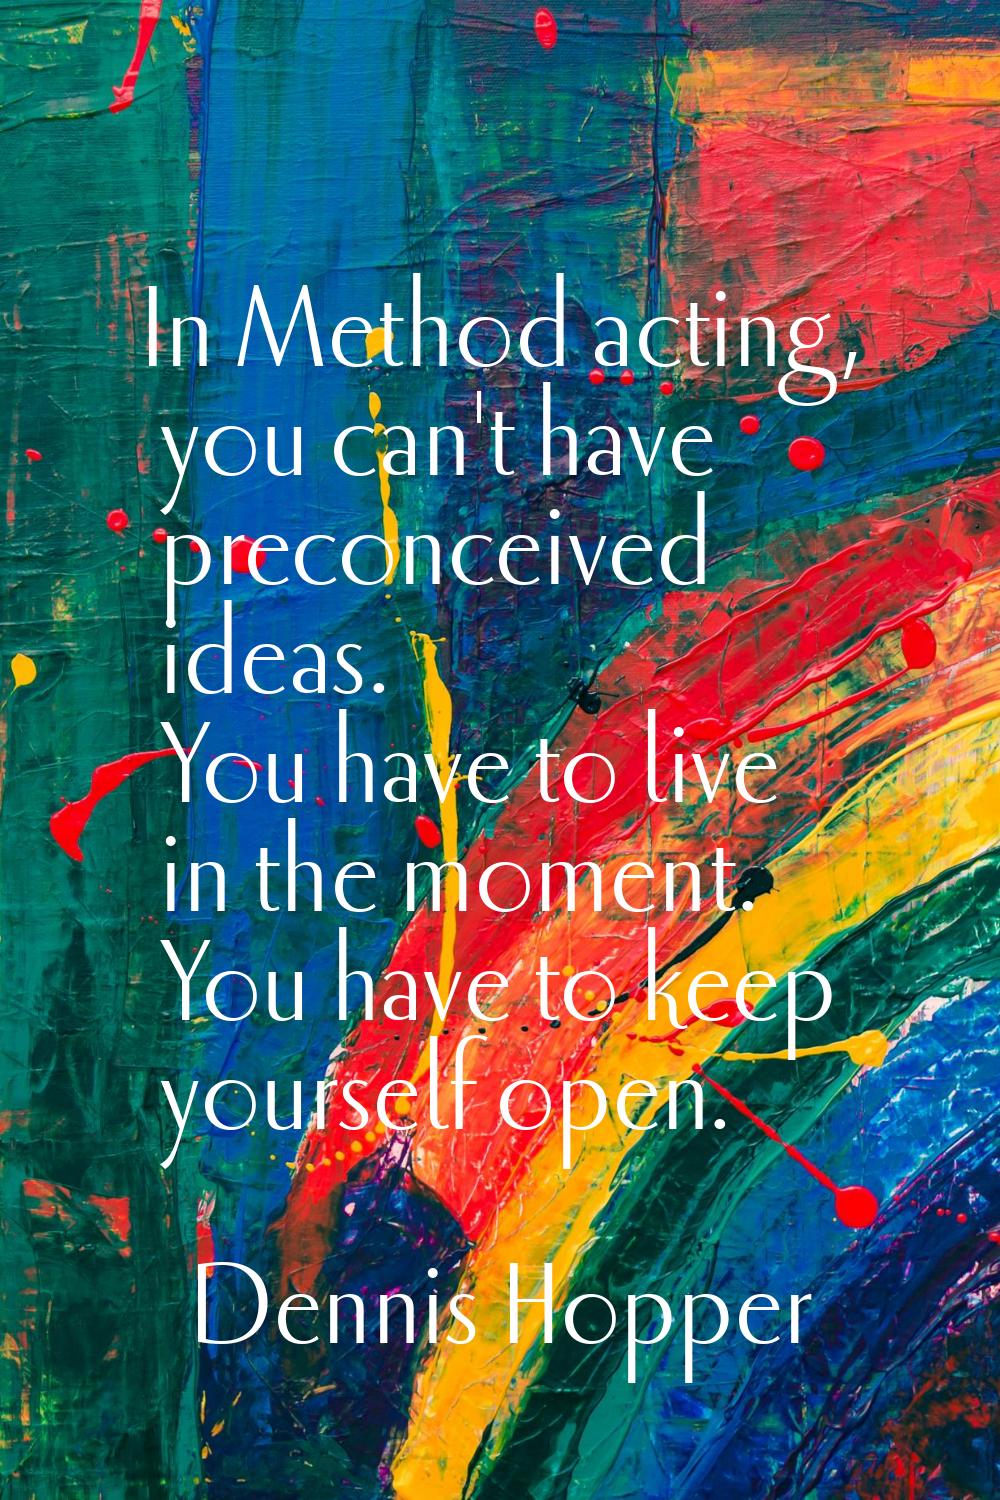 In Method acting, you can't have preconceived ideas. You have to live in the moment. You have to ke